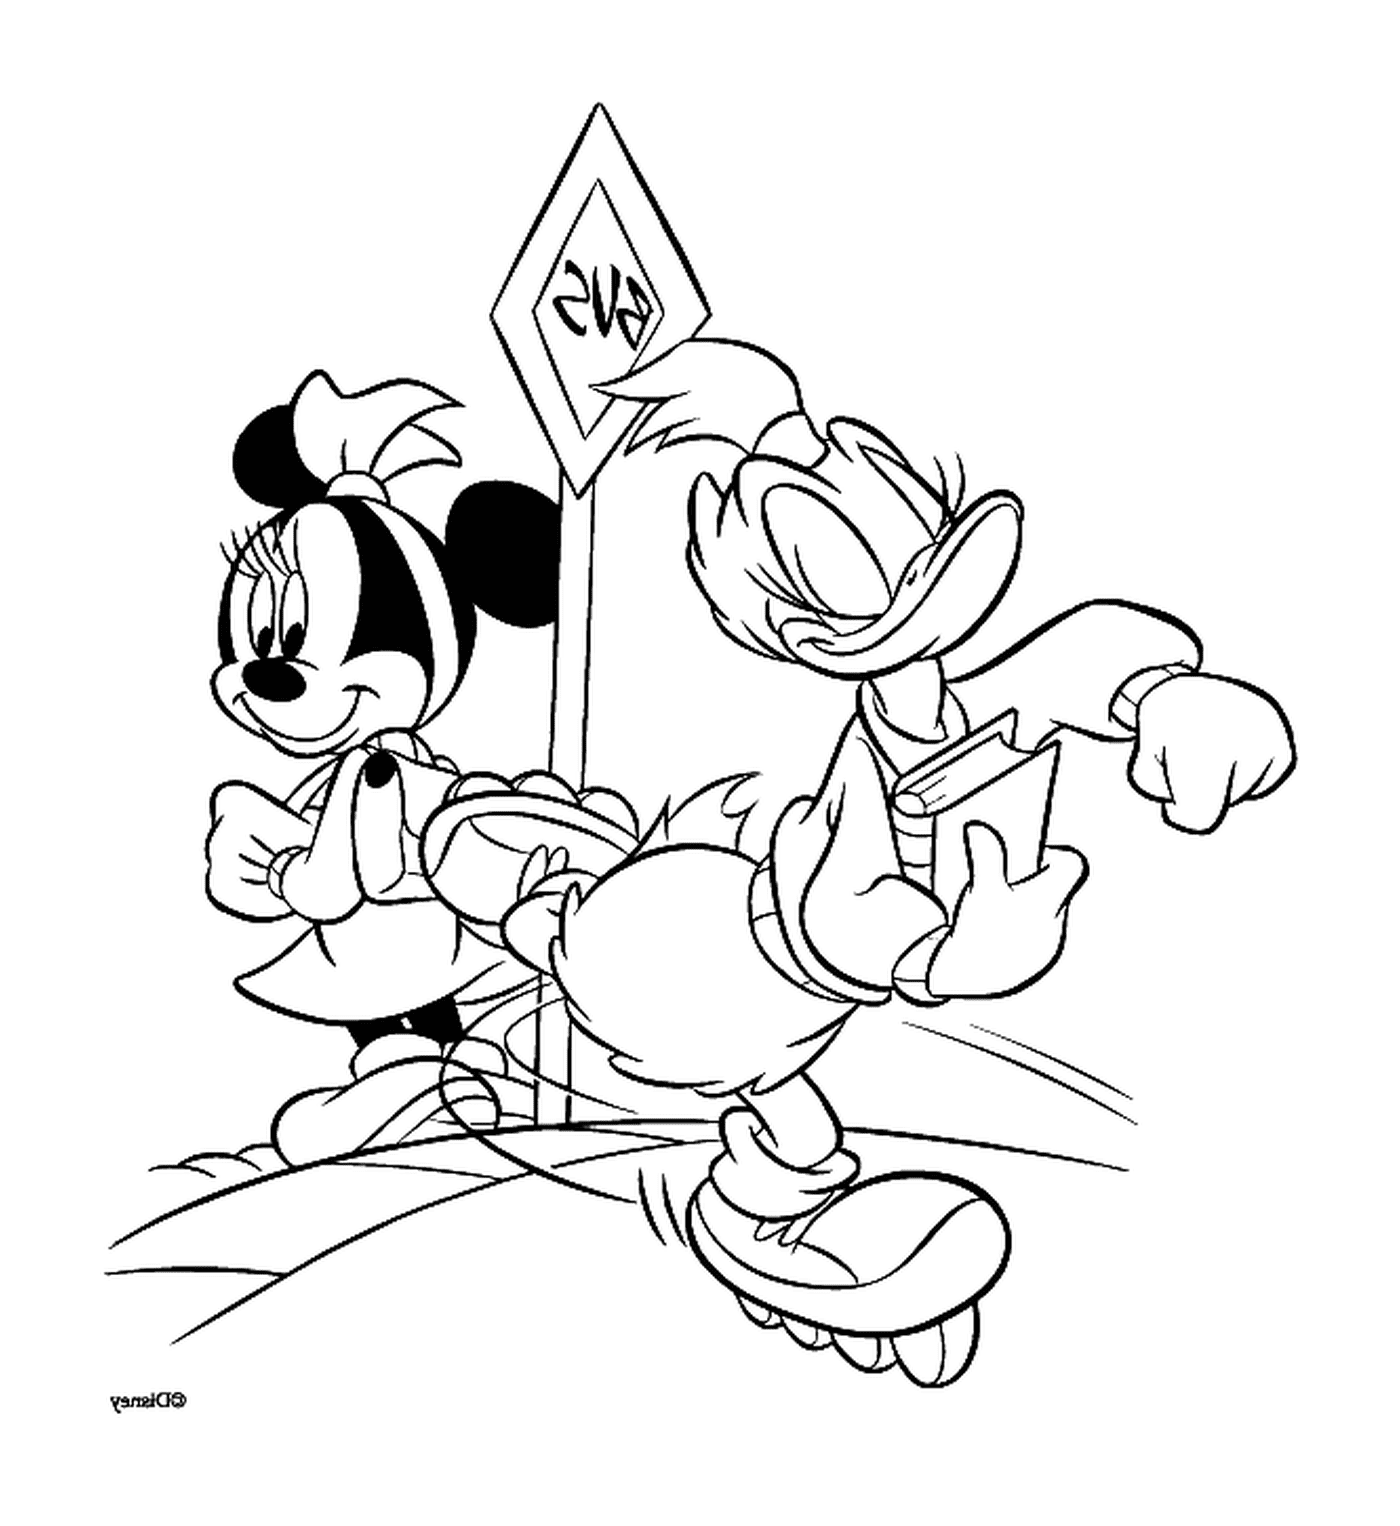  Minnie's waiting for the bus, but Daisy's going rollerblading 